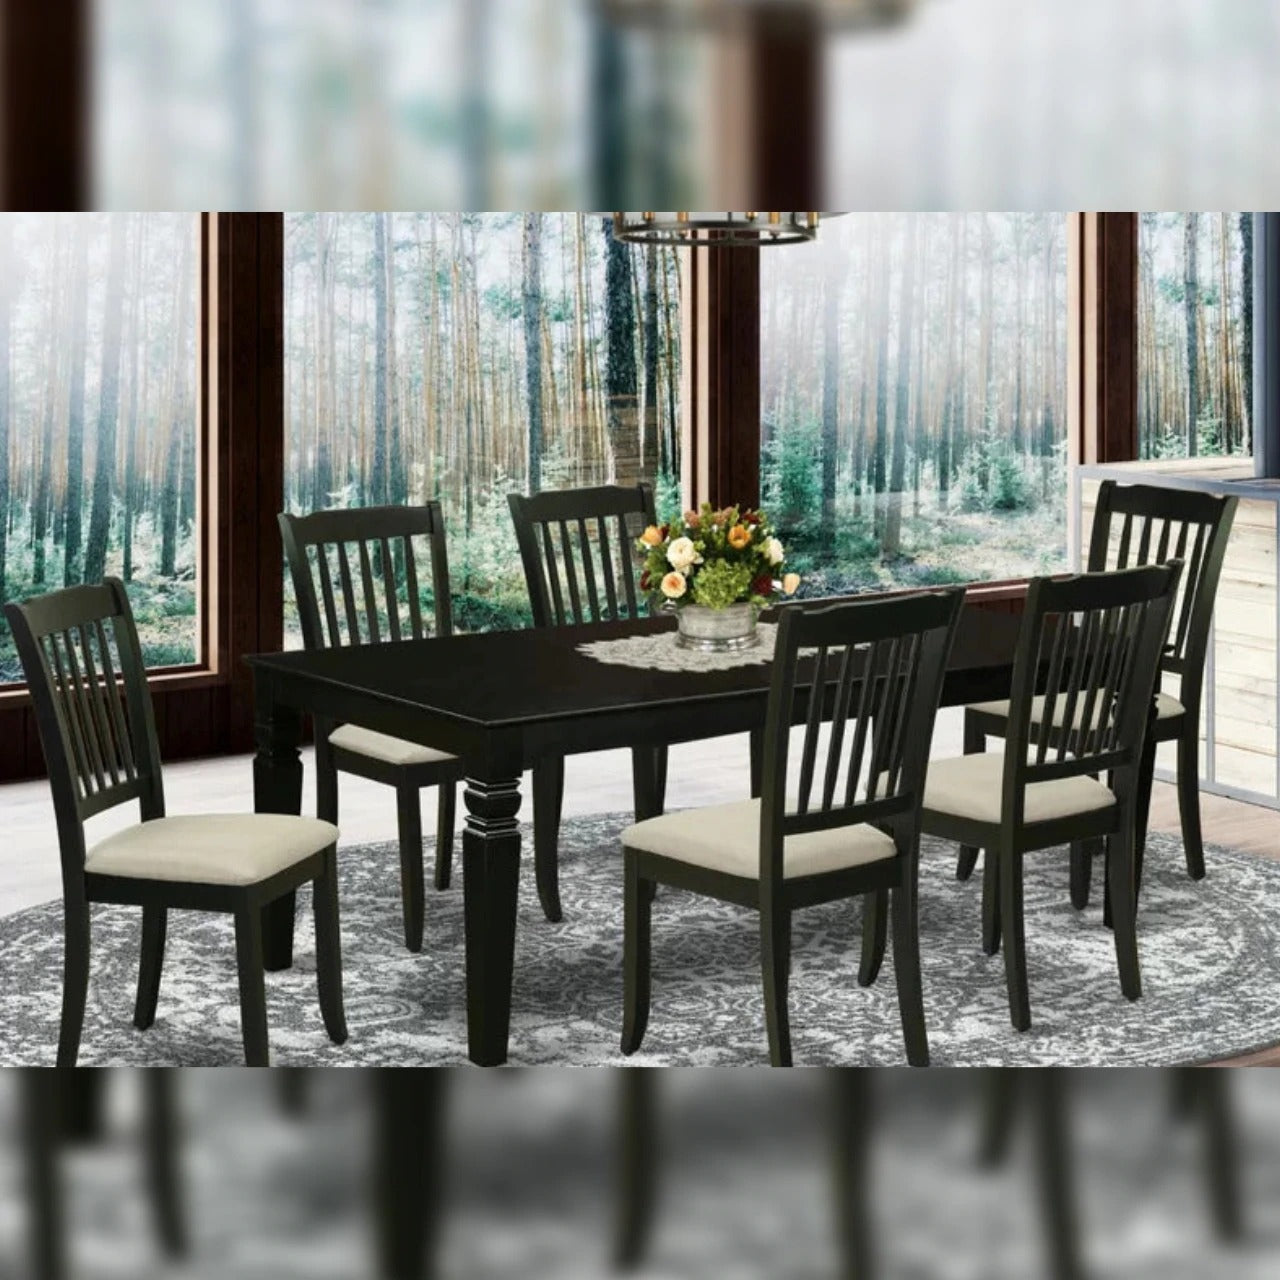 6 Seater Dining Table, Dining Table Set 6 Seater, 6 Seater Dining Table Size, 6 Seater Round Dining Table